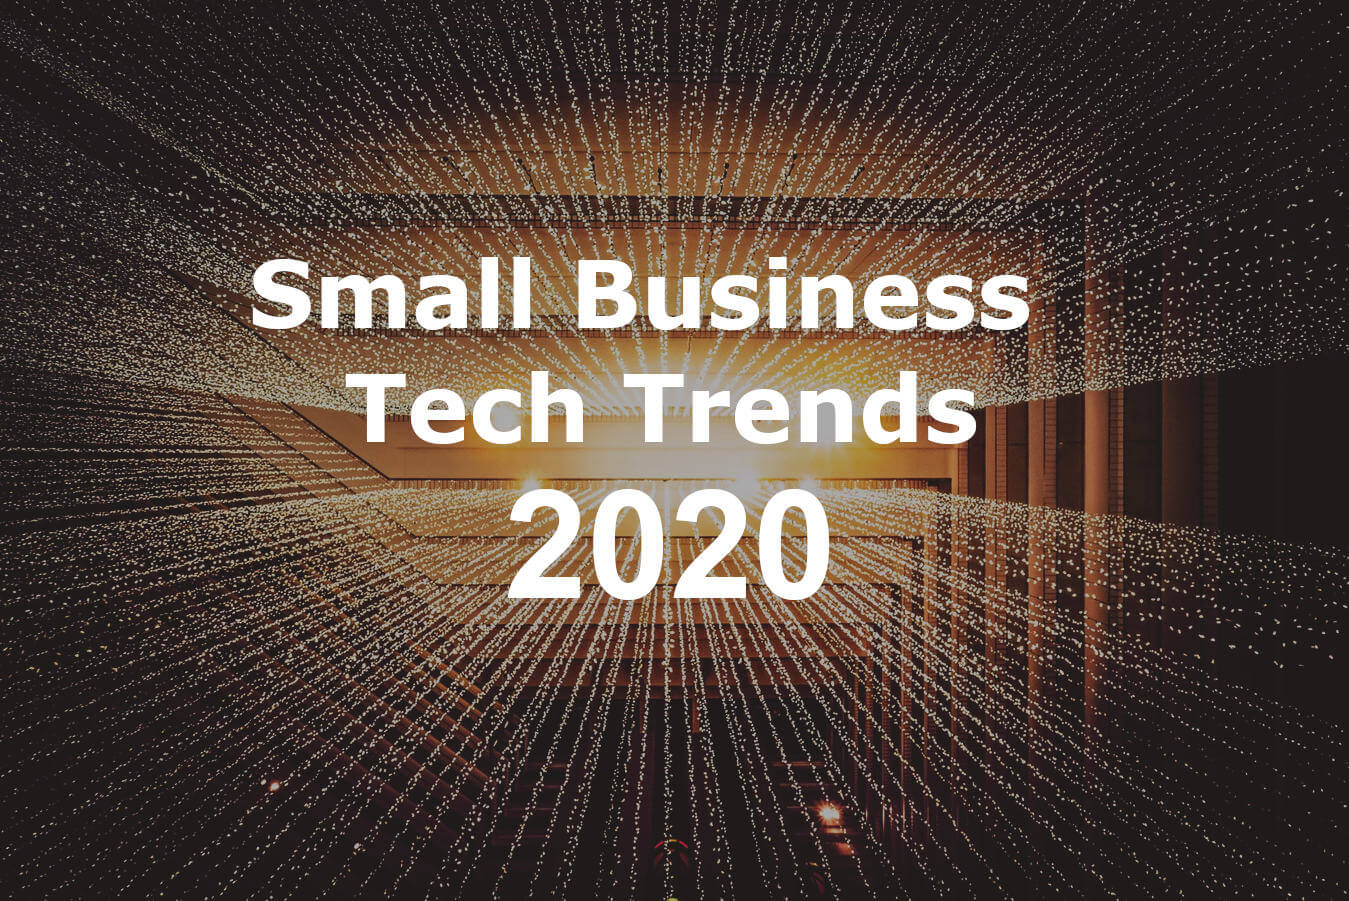 Small business tech trends in 2020